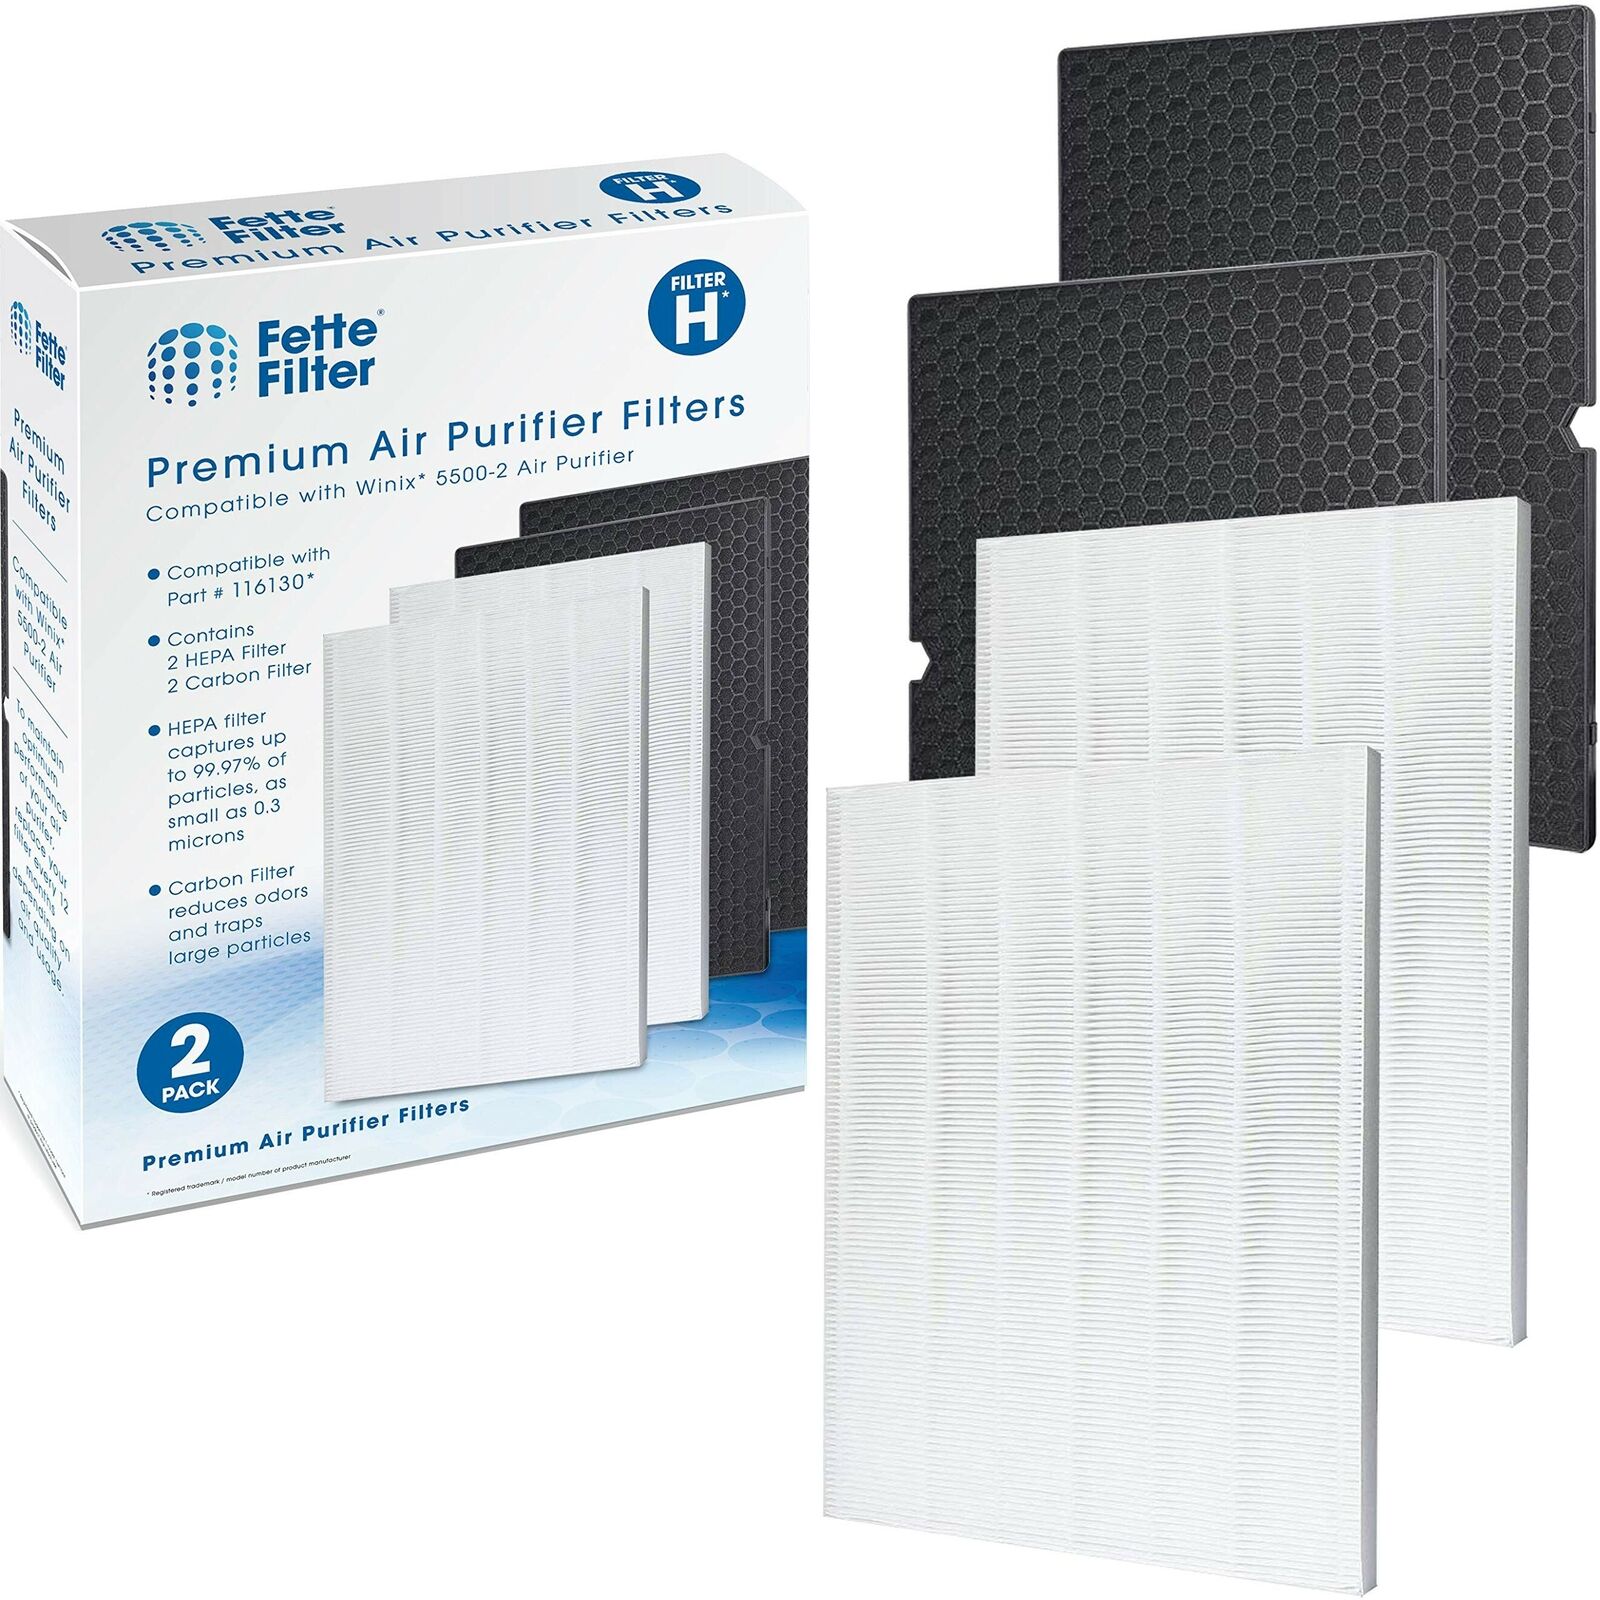 True Hepa Air Purifier Replacement Filter Compatible with Winix 116130 Filter H 